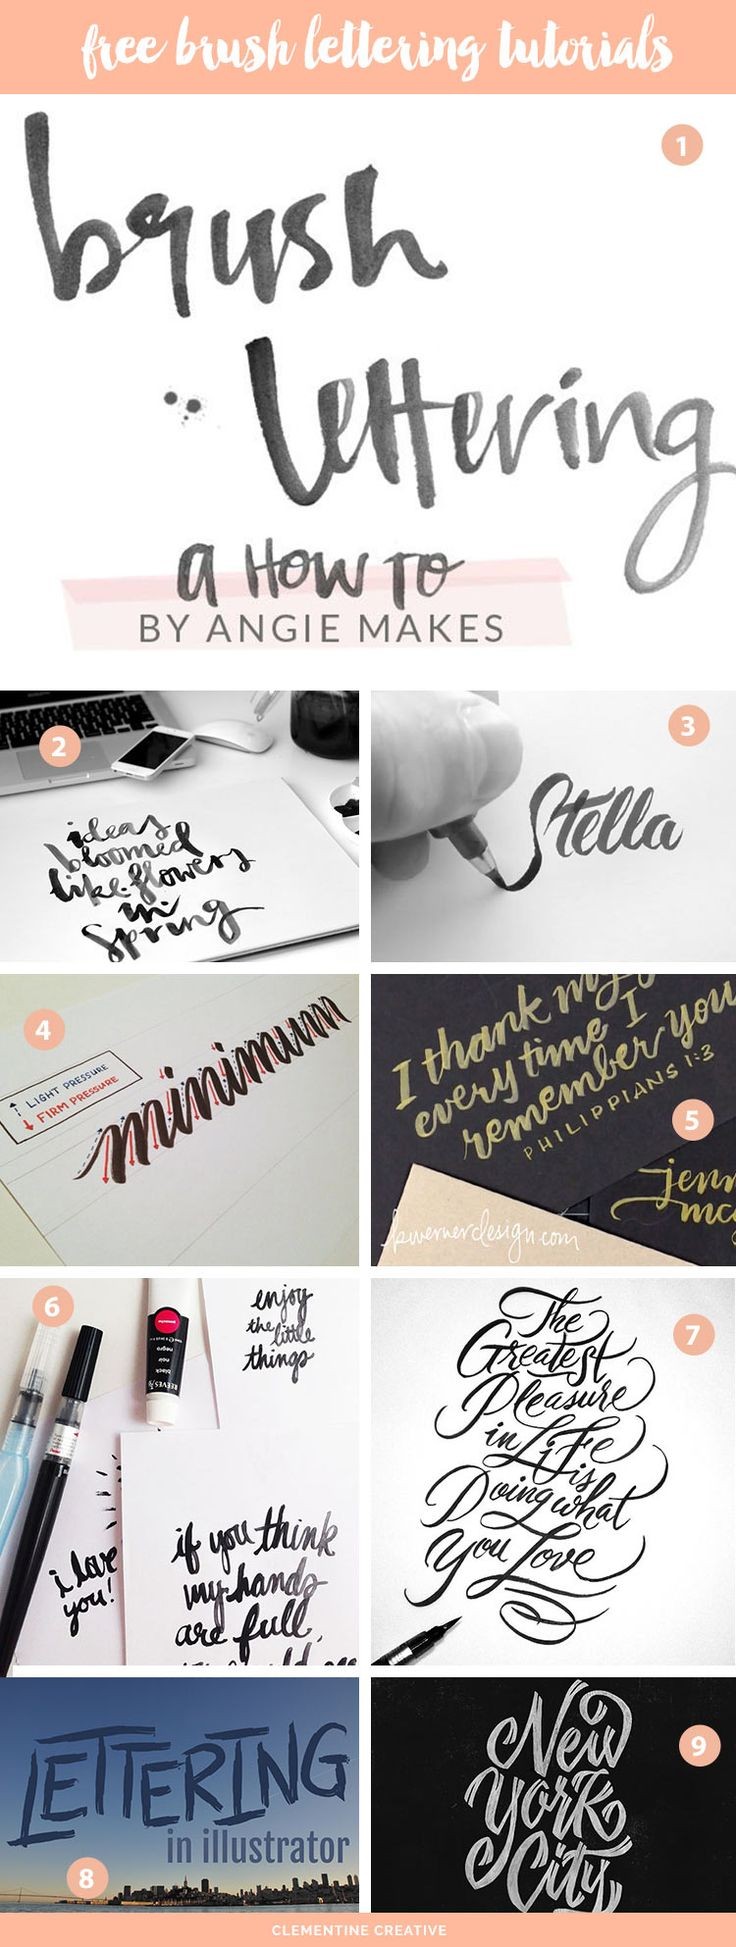 Hand Lettering - A Collection of Amazing Brush Let...